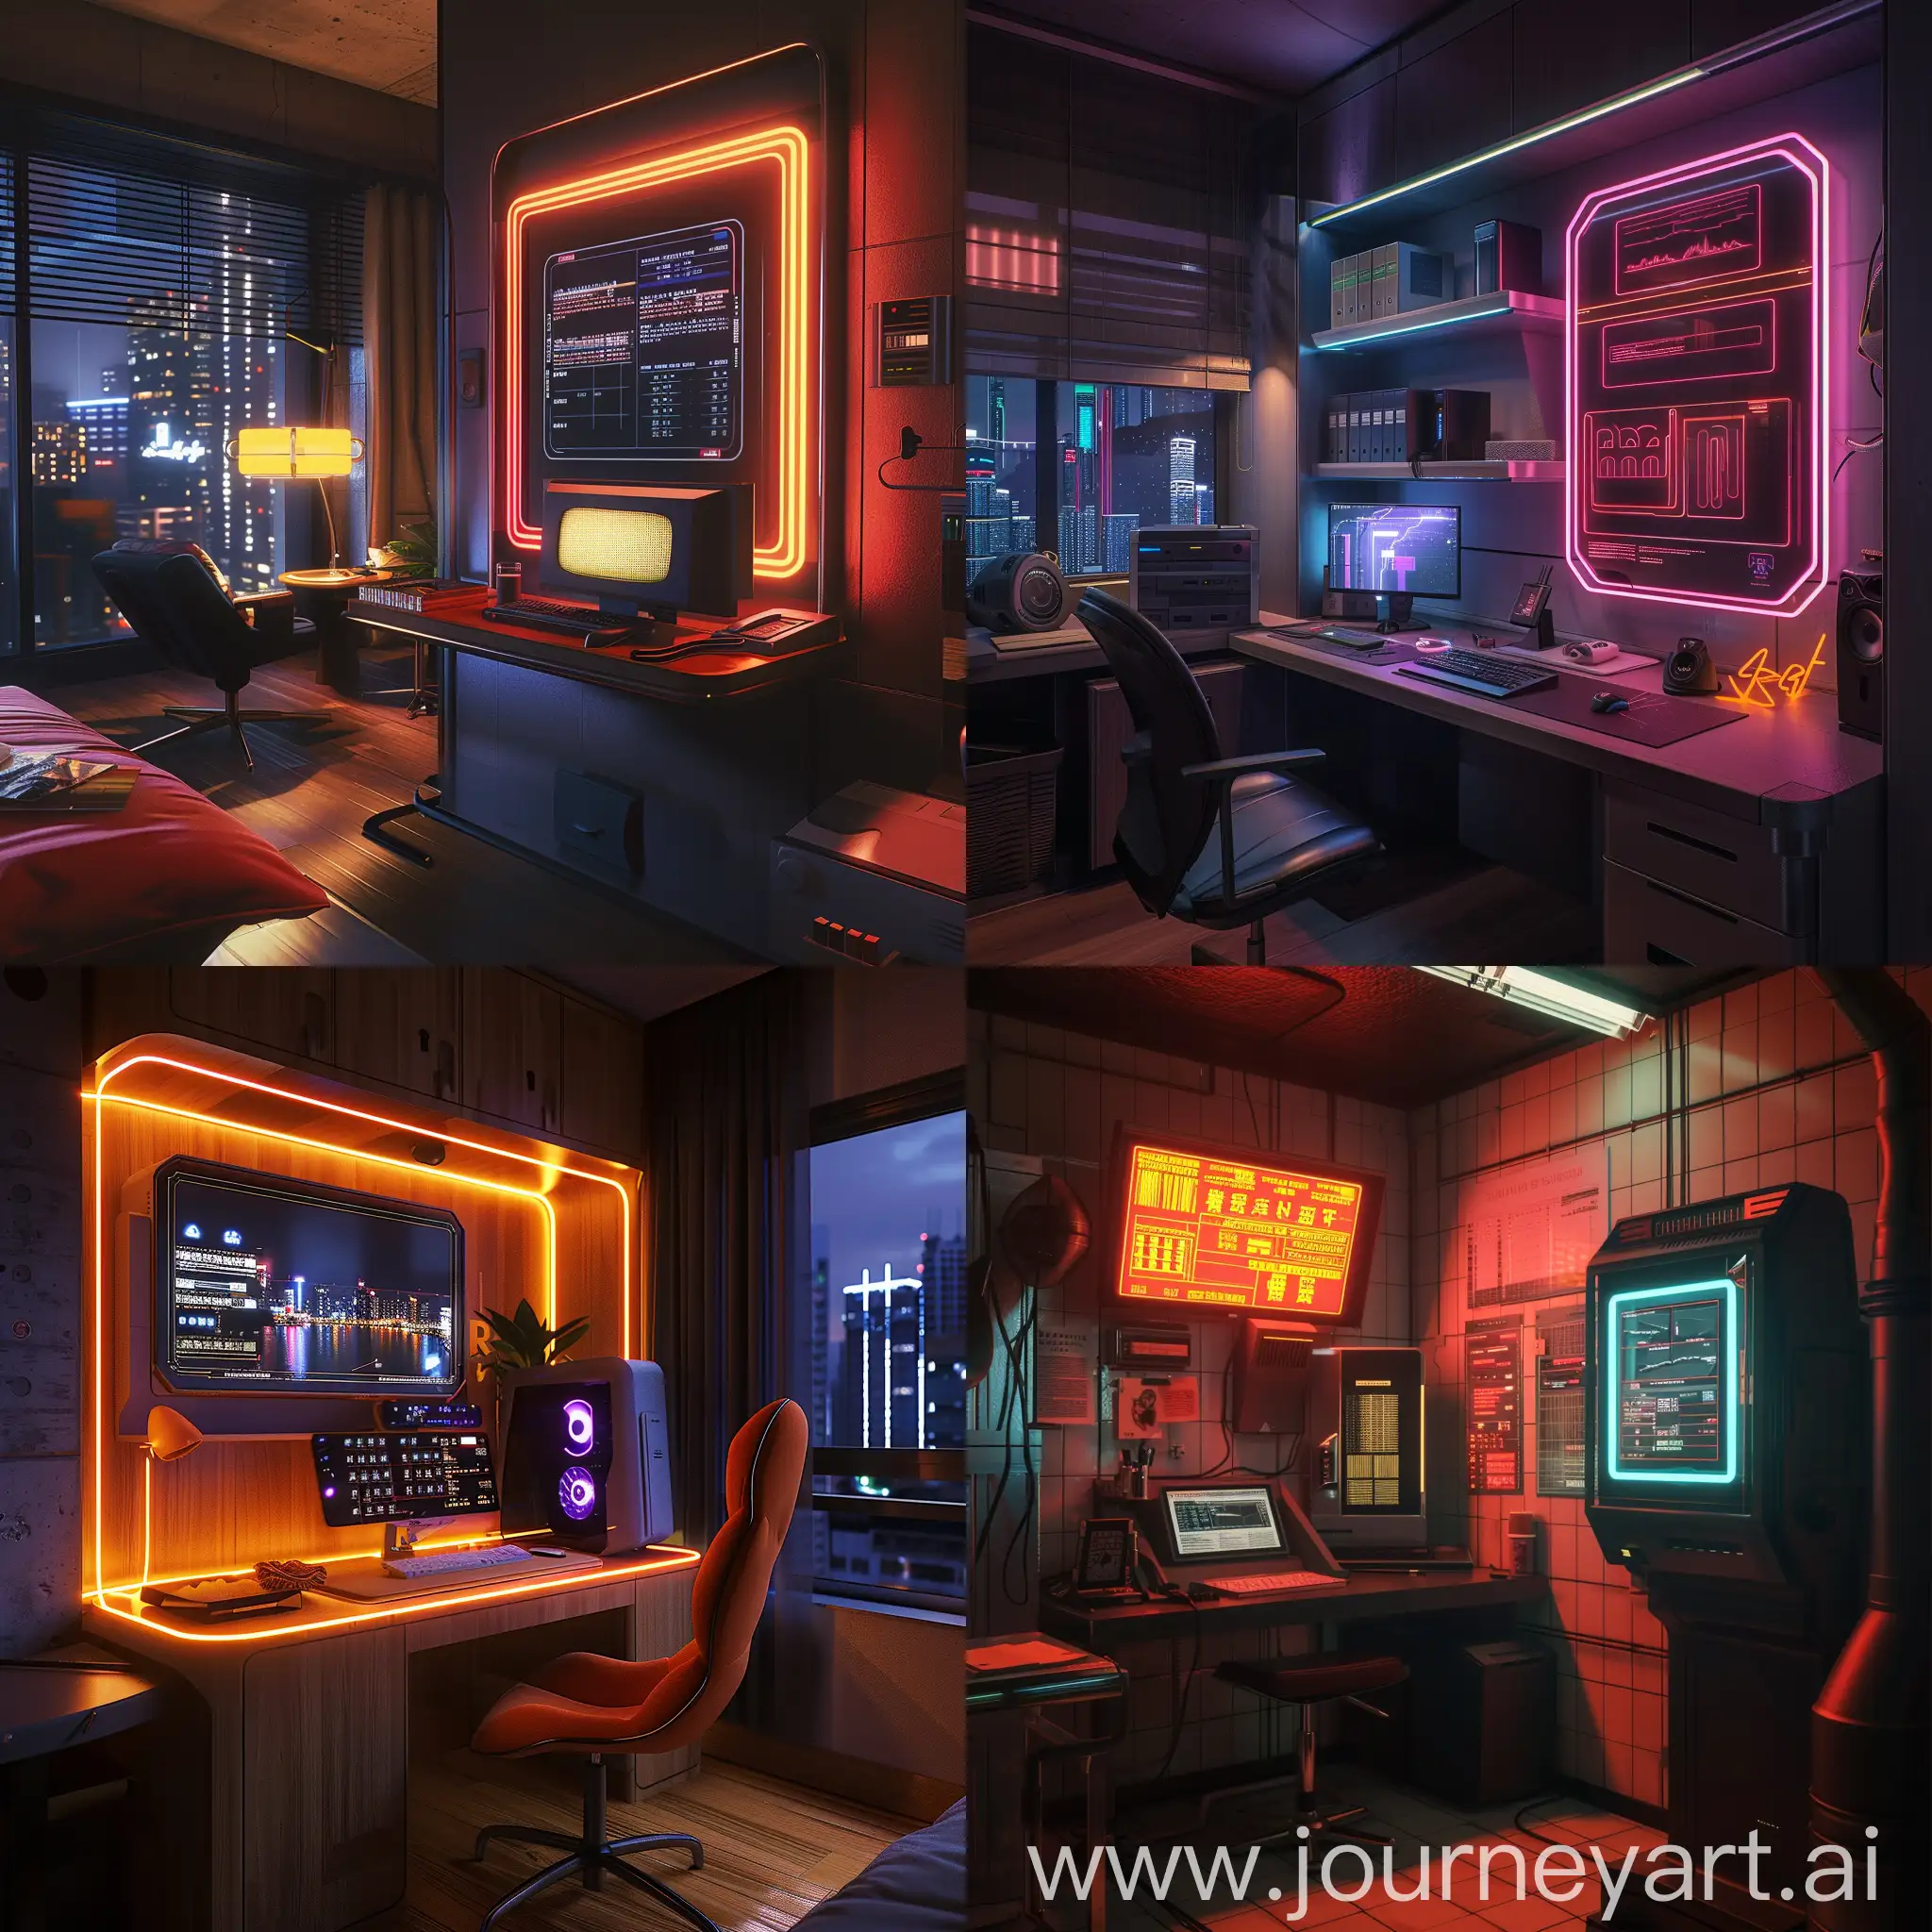 hong kong ghost in the shell cyberpunk 2077 vi apartment photorealistic sleek dark modern minimalst japan inspired chungking mansions small apartment fully furnished high tech besmer displays computer neon terminal